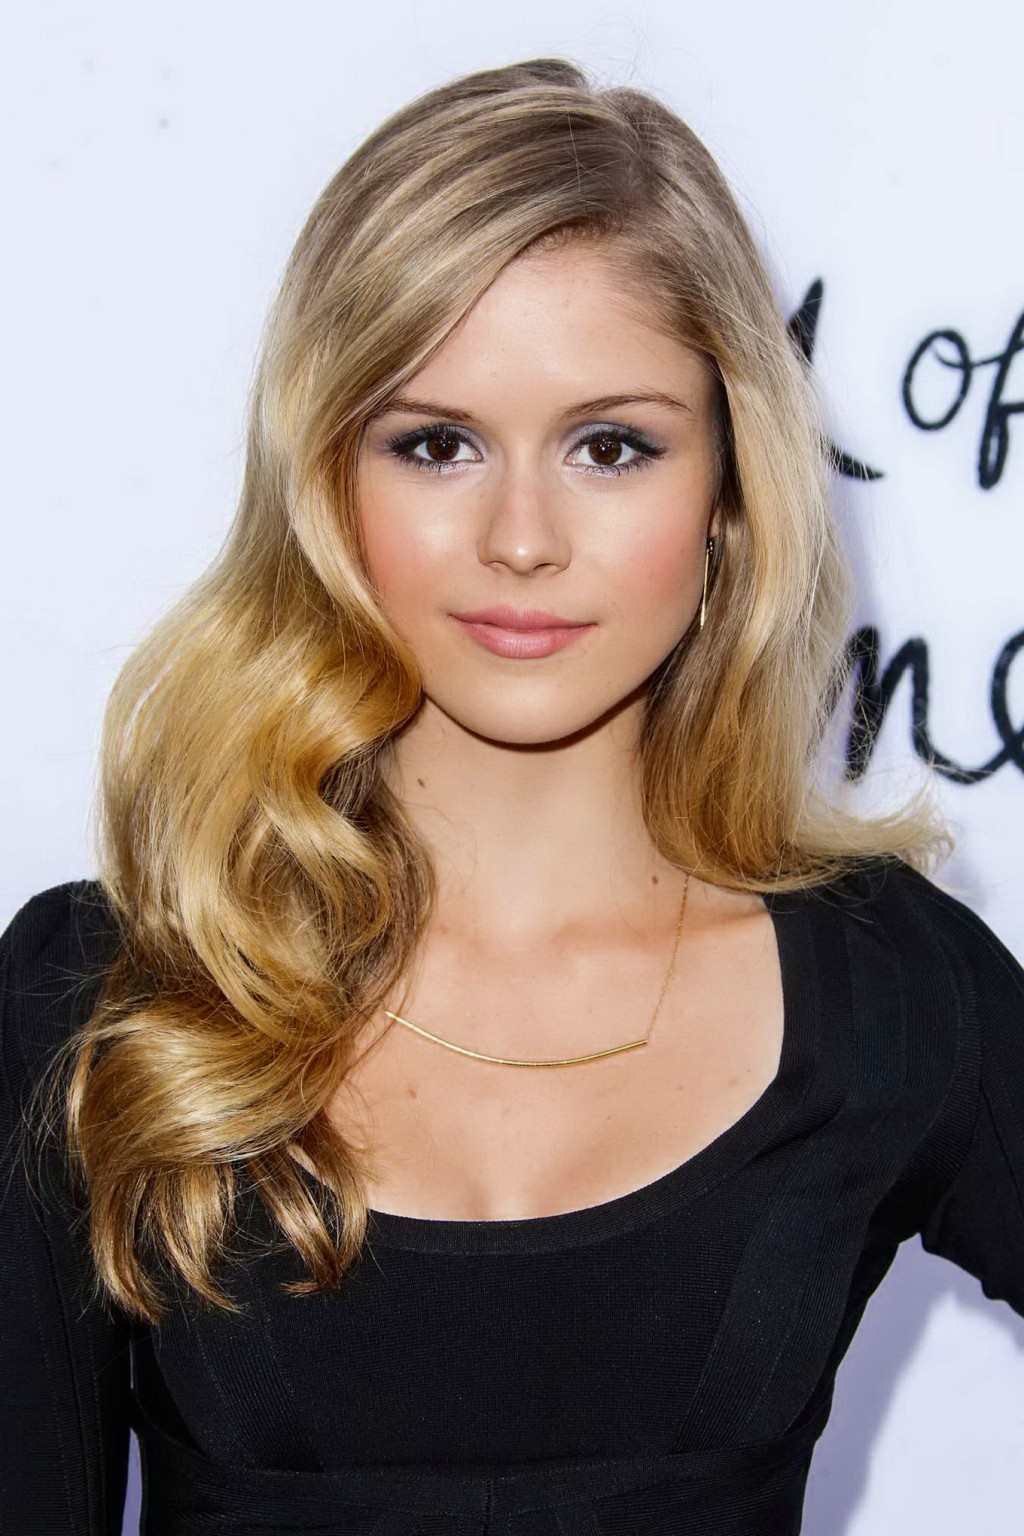 Erin Moriarty shows big cleavage wearing sexy black mini dress at The Kings of S #75230323